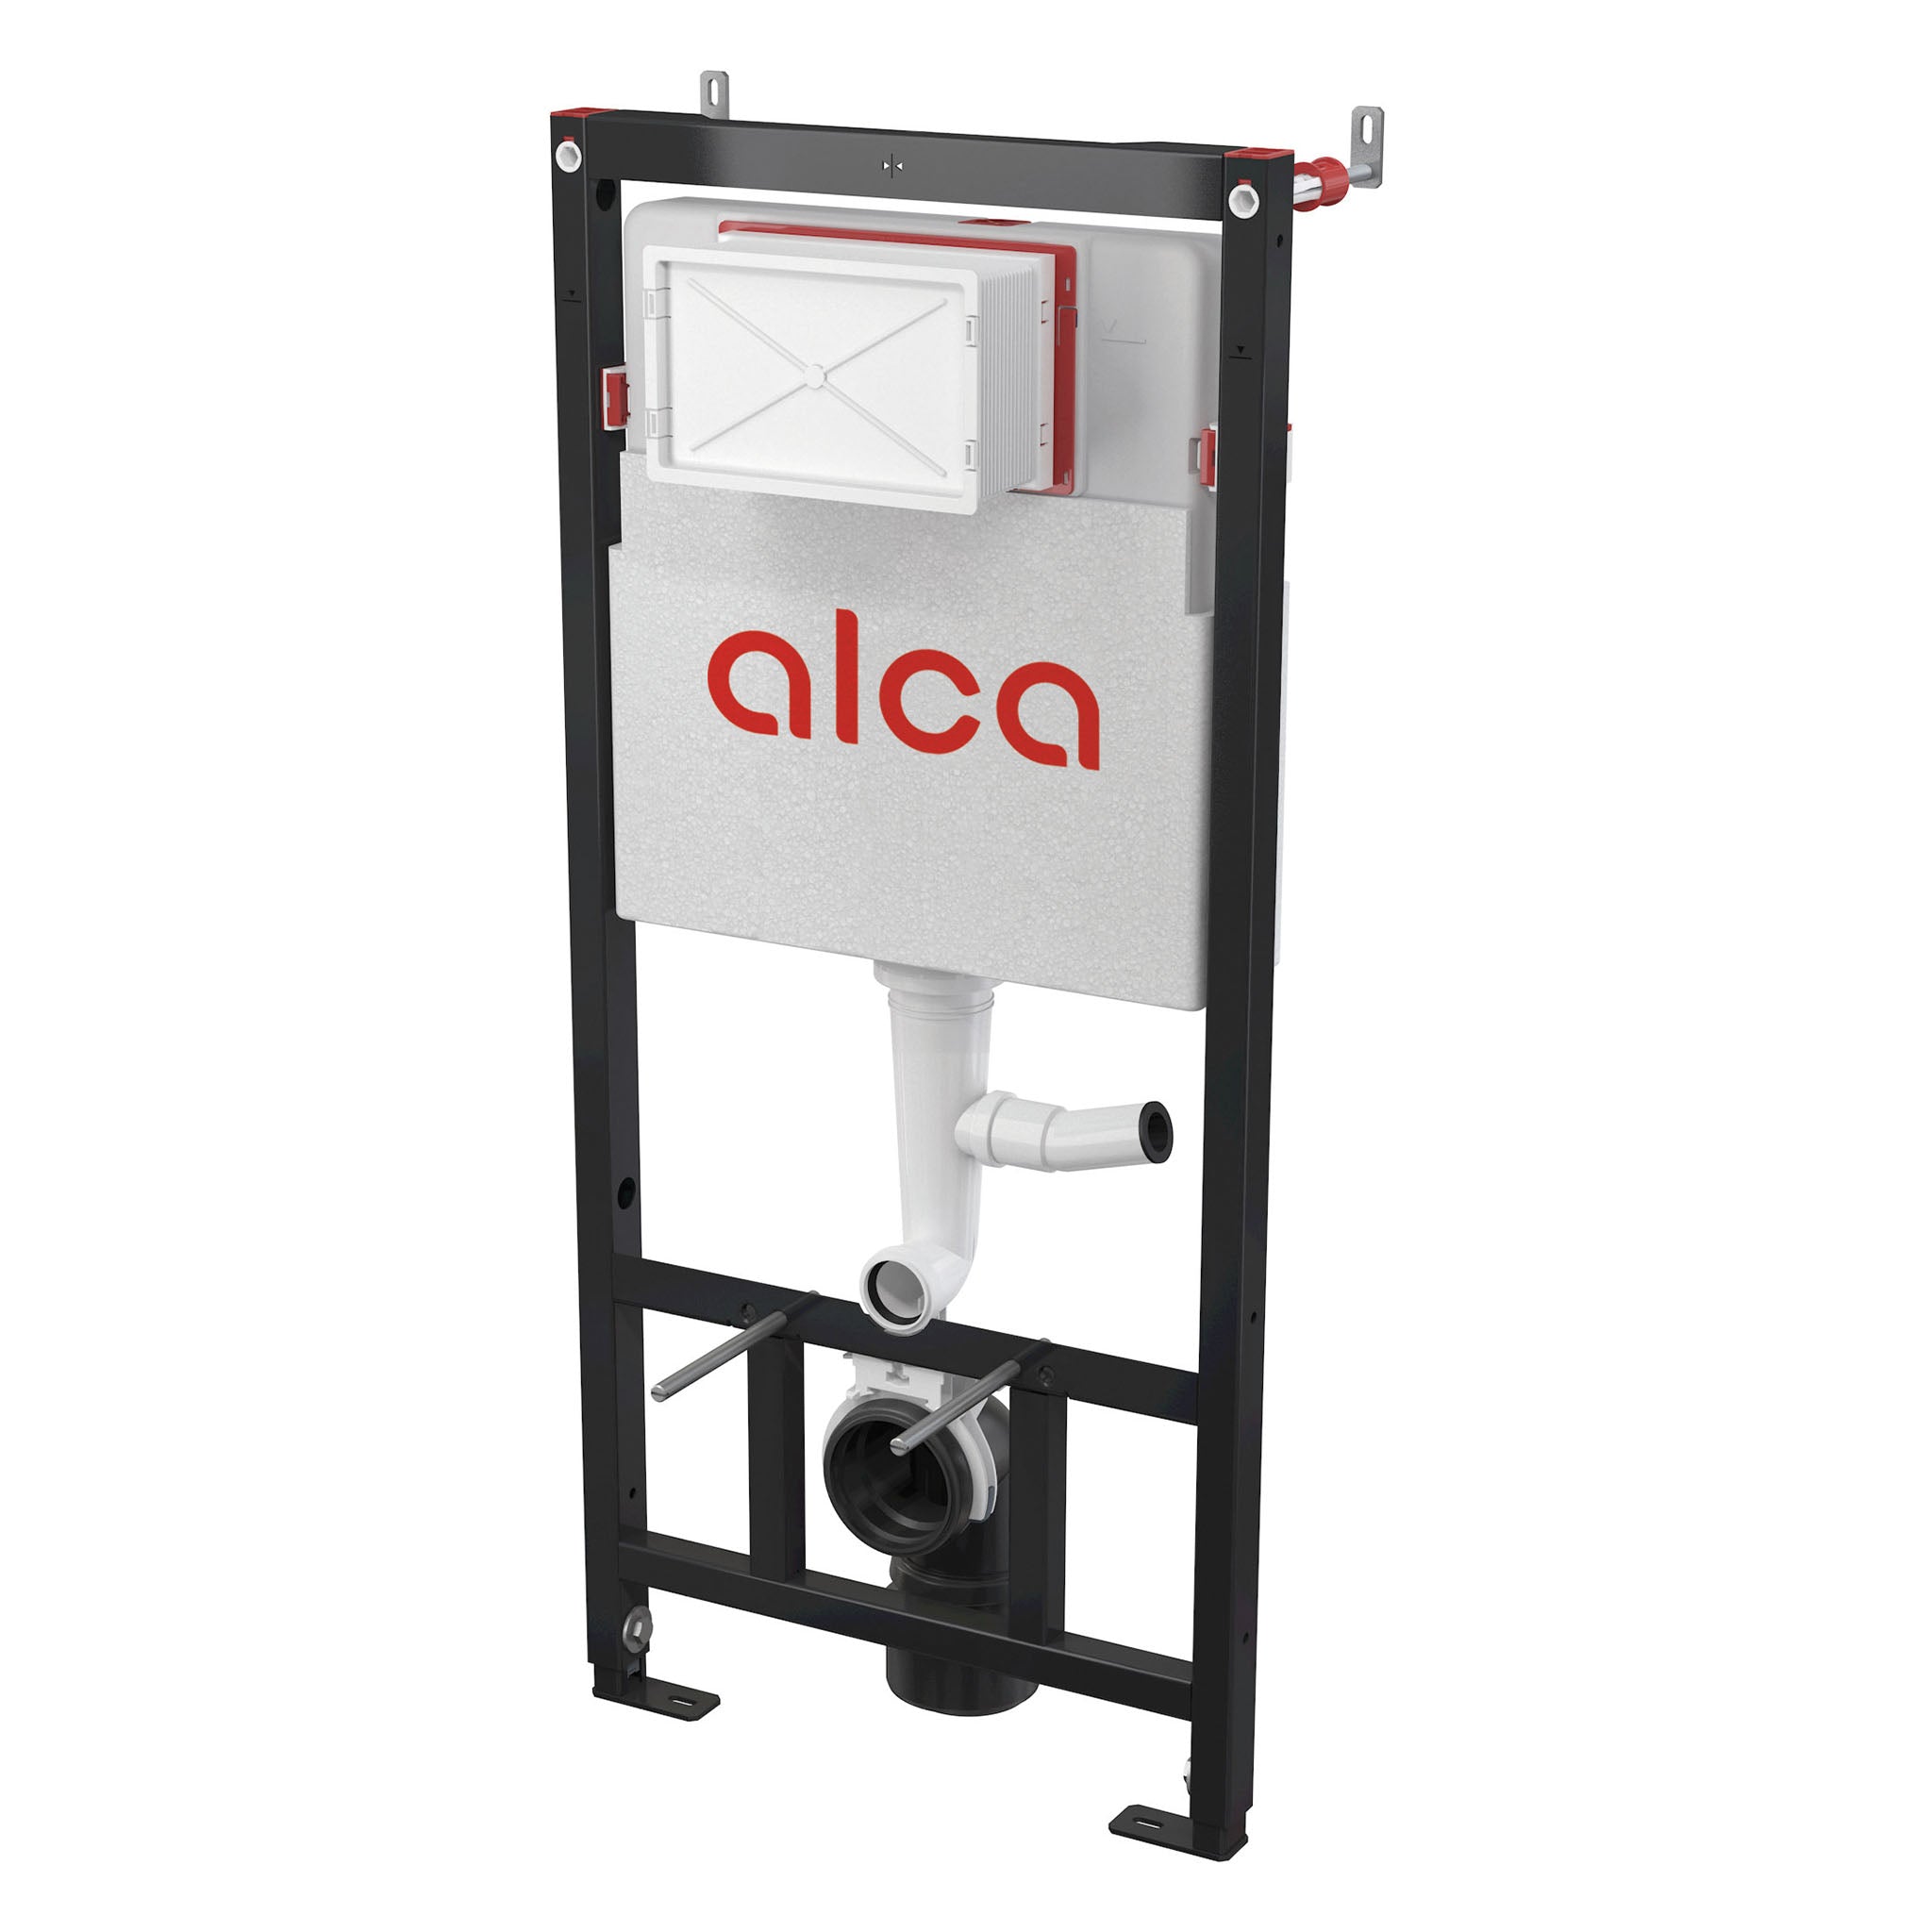 MyLife Alca 1120mm Wall Mounted Toilet Frame & Concealed Cistern